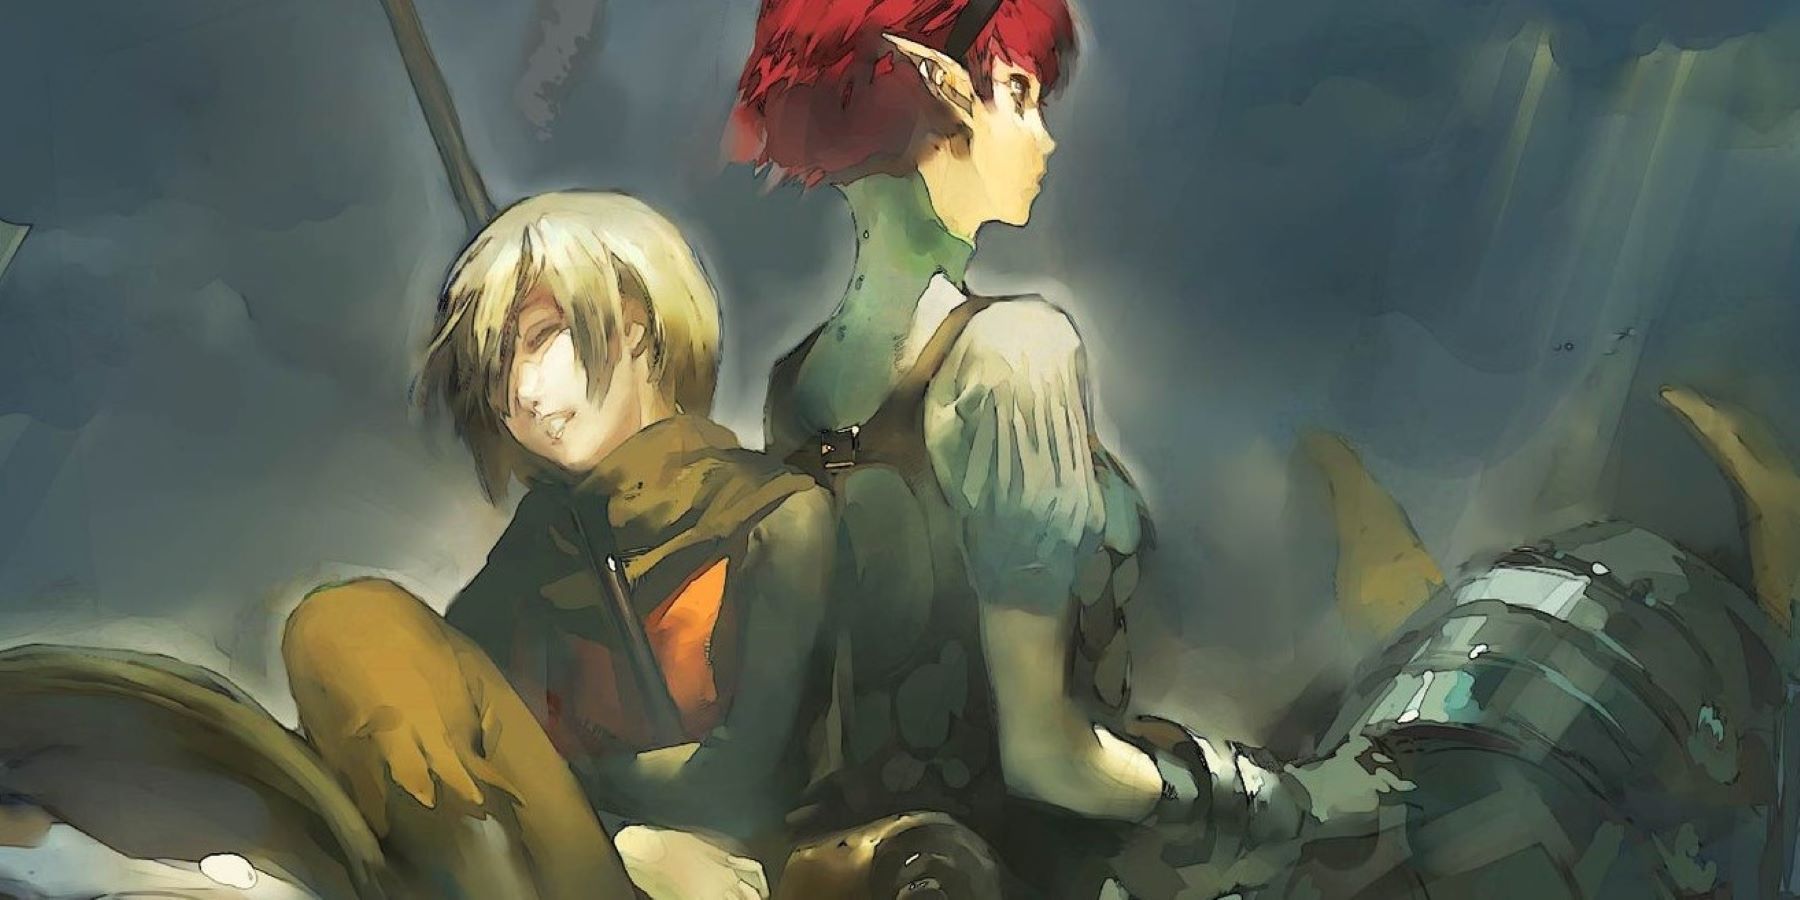 Concept art for Project Re Fantasy showing a red-haired knight and a blond person on horseback under cloudy skies